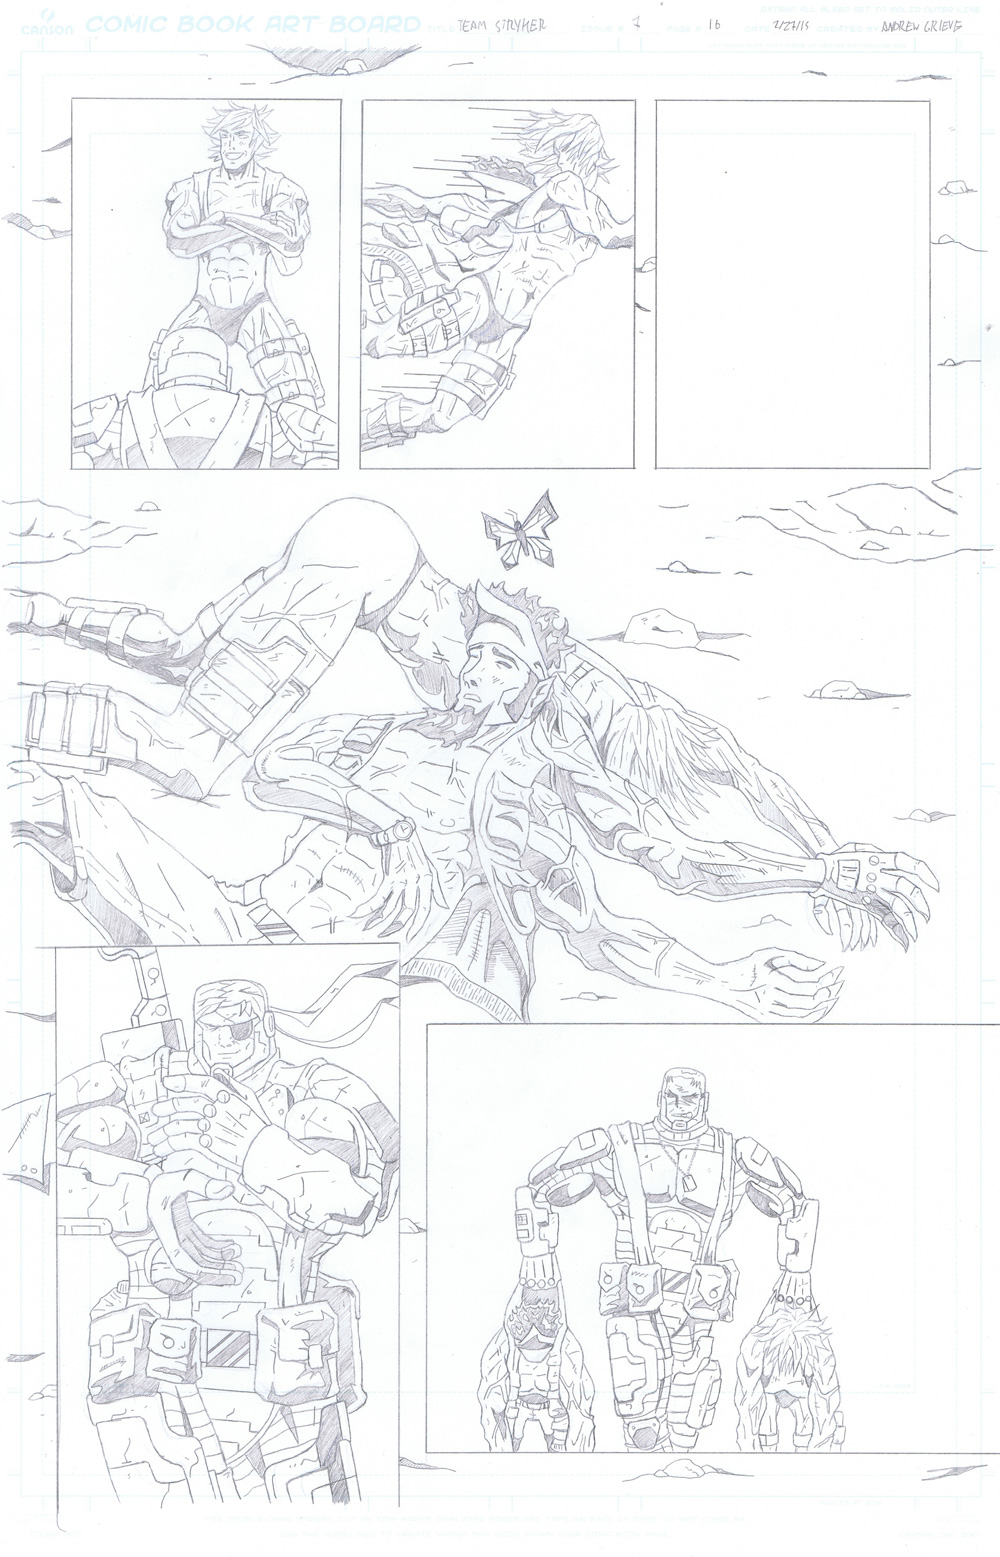 MISSION 007: PAGE 16 PENCIL